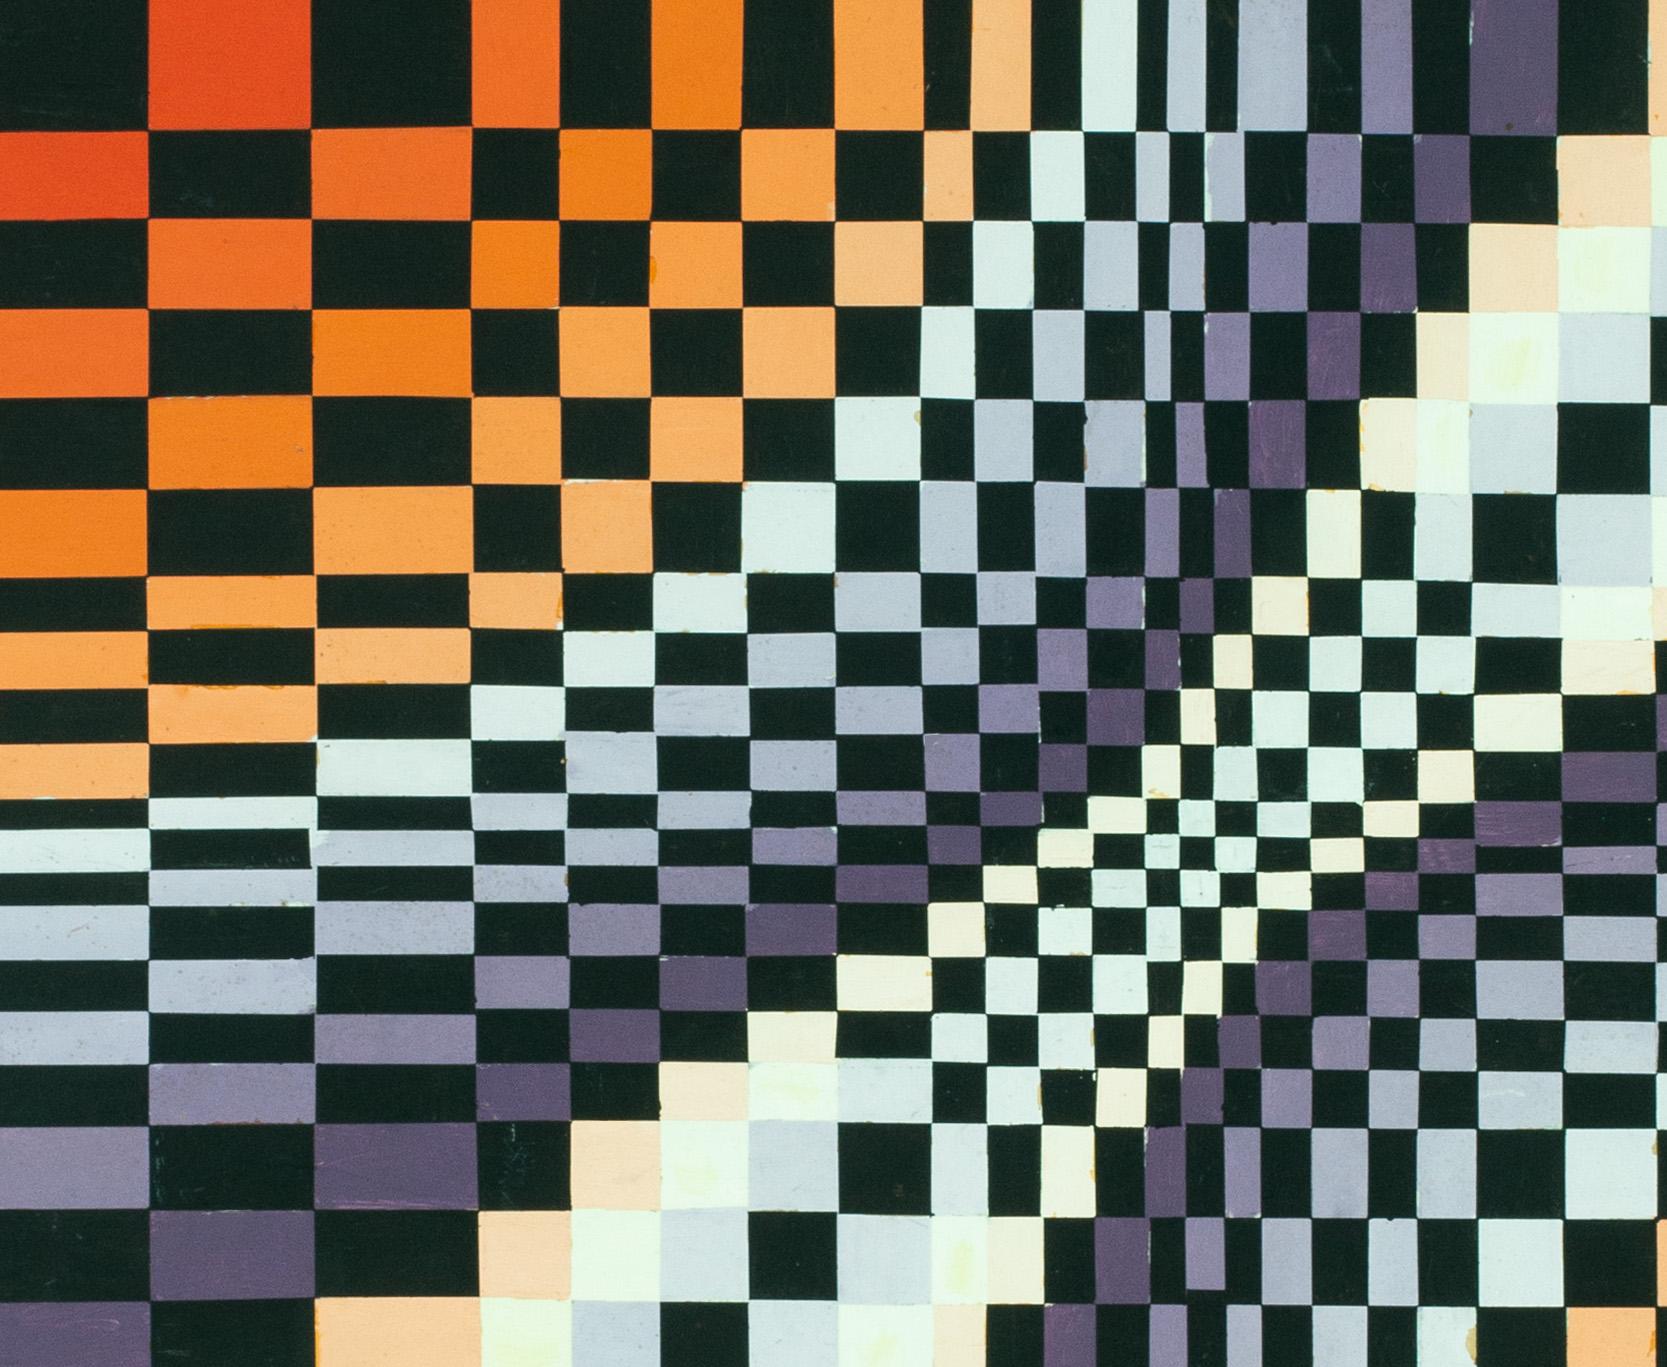 op art movement in squares